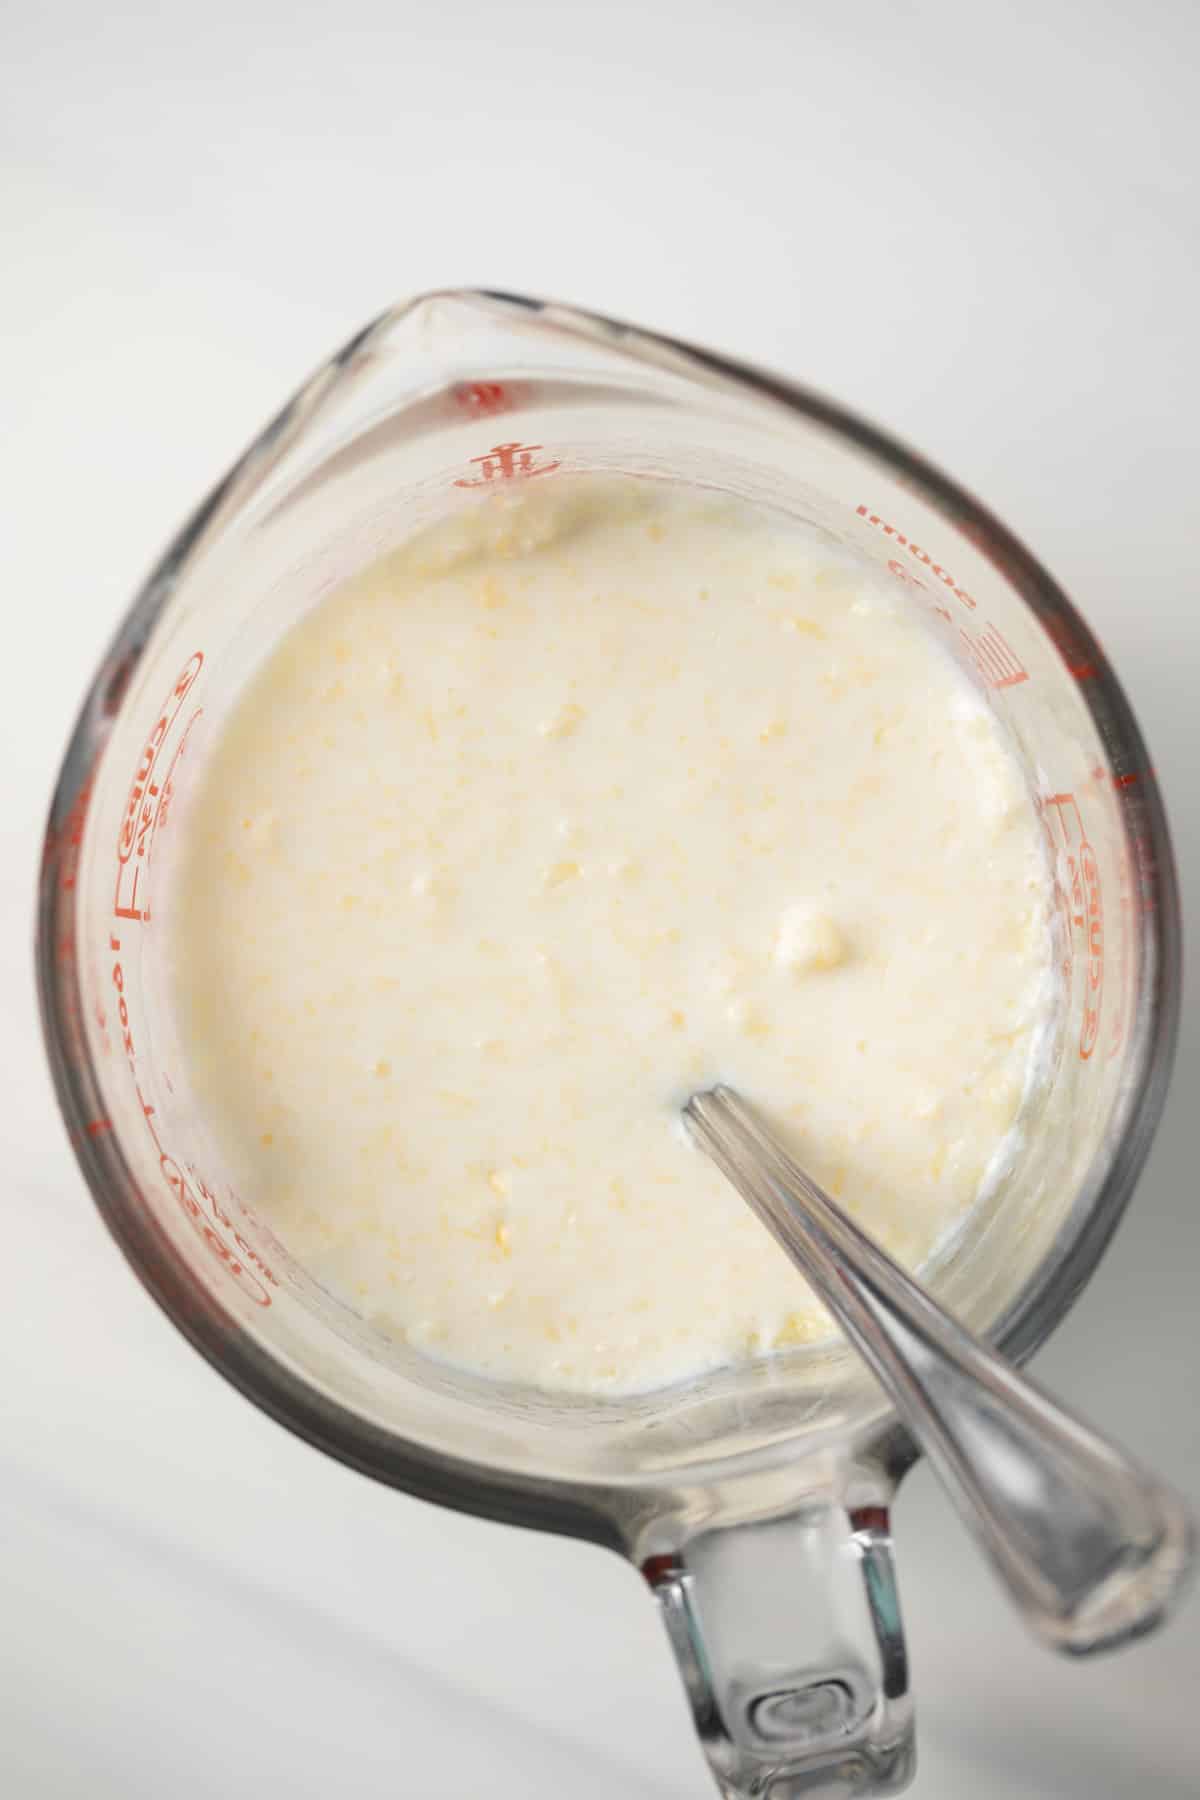 Buttermilk and butter mixed in measuring cup.